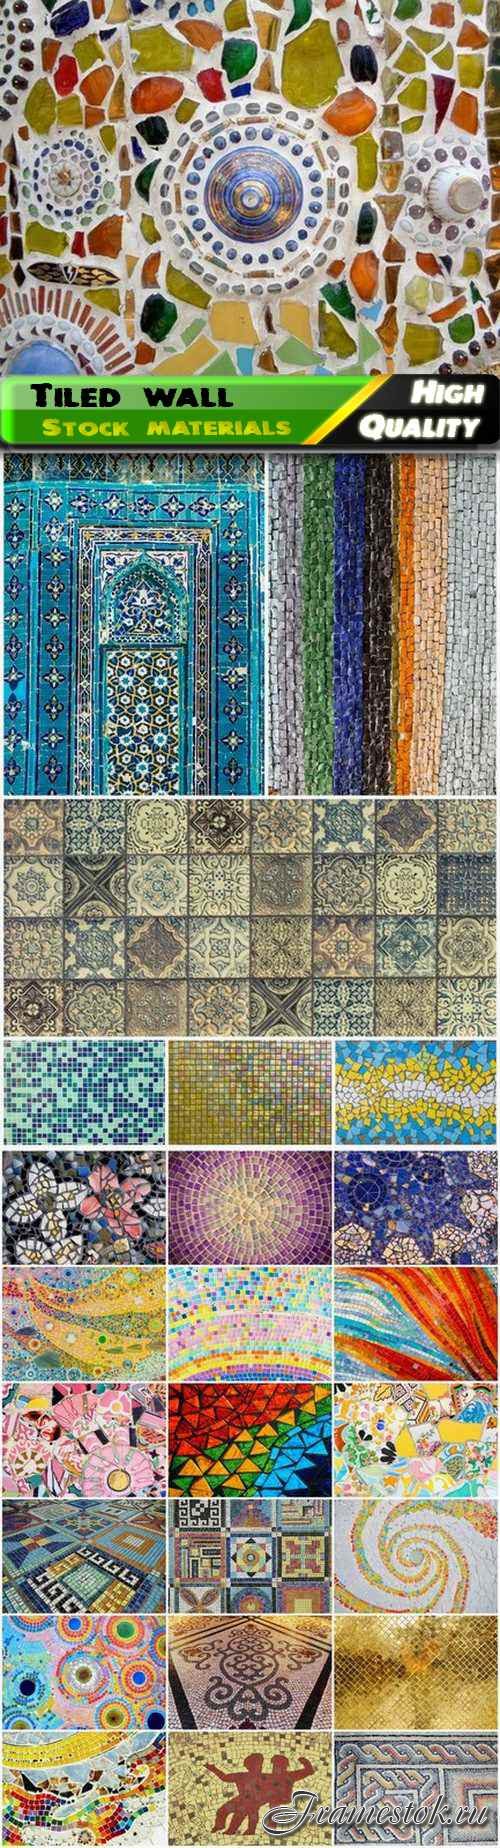 Tiled wall with monochrome and abstract mosaic ornament 25 HQ Jpg